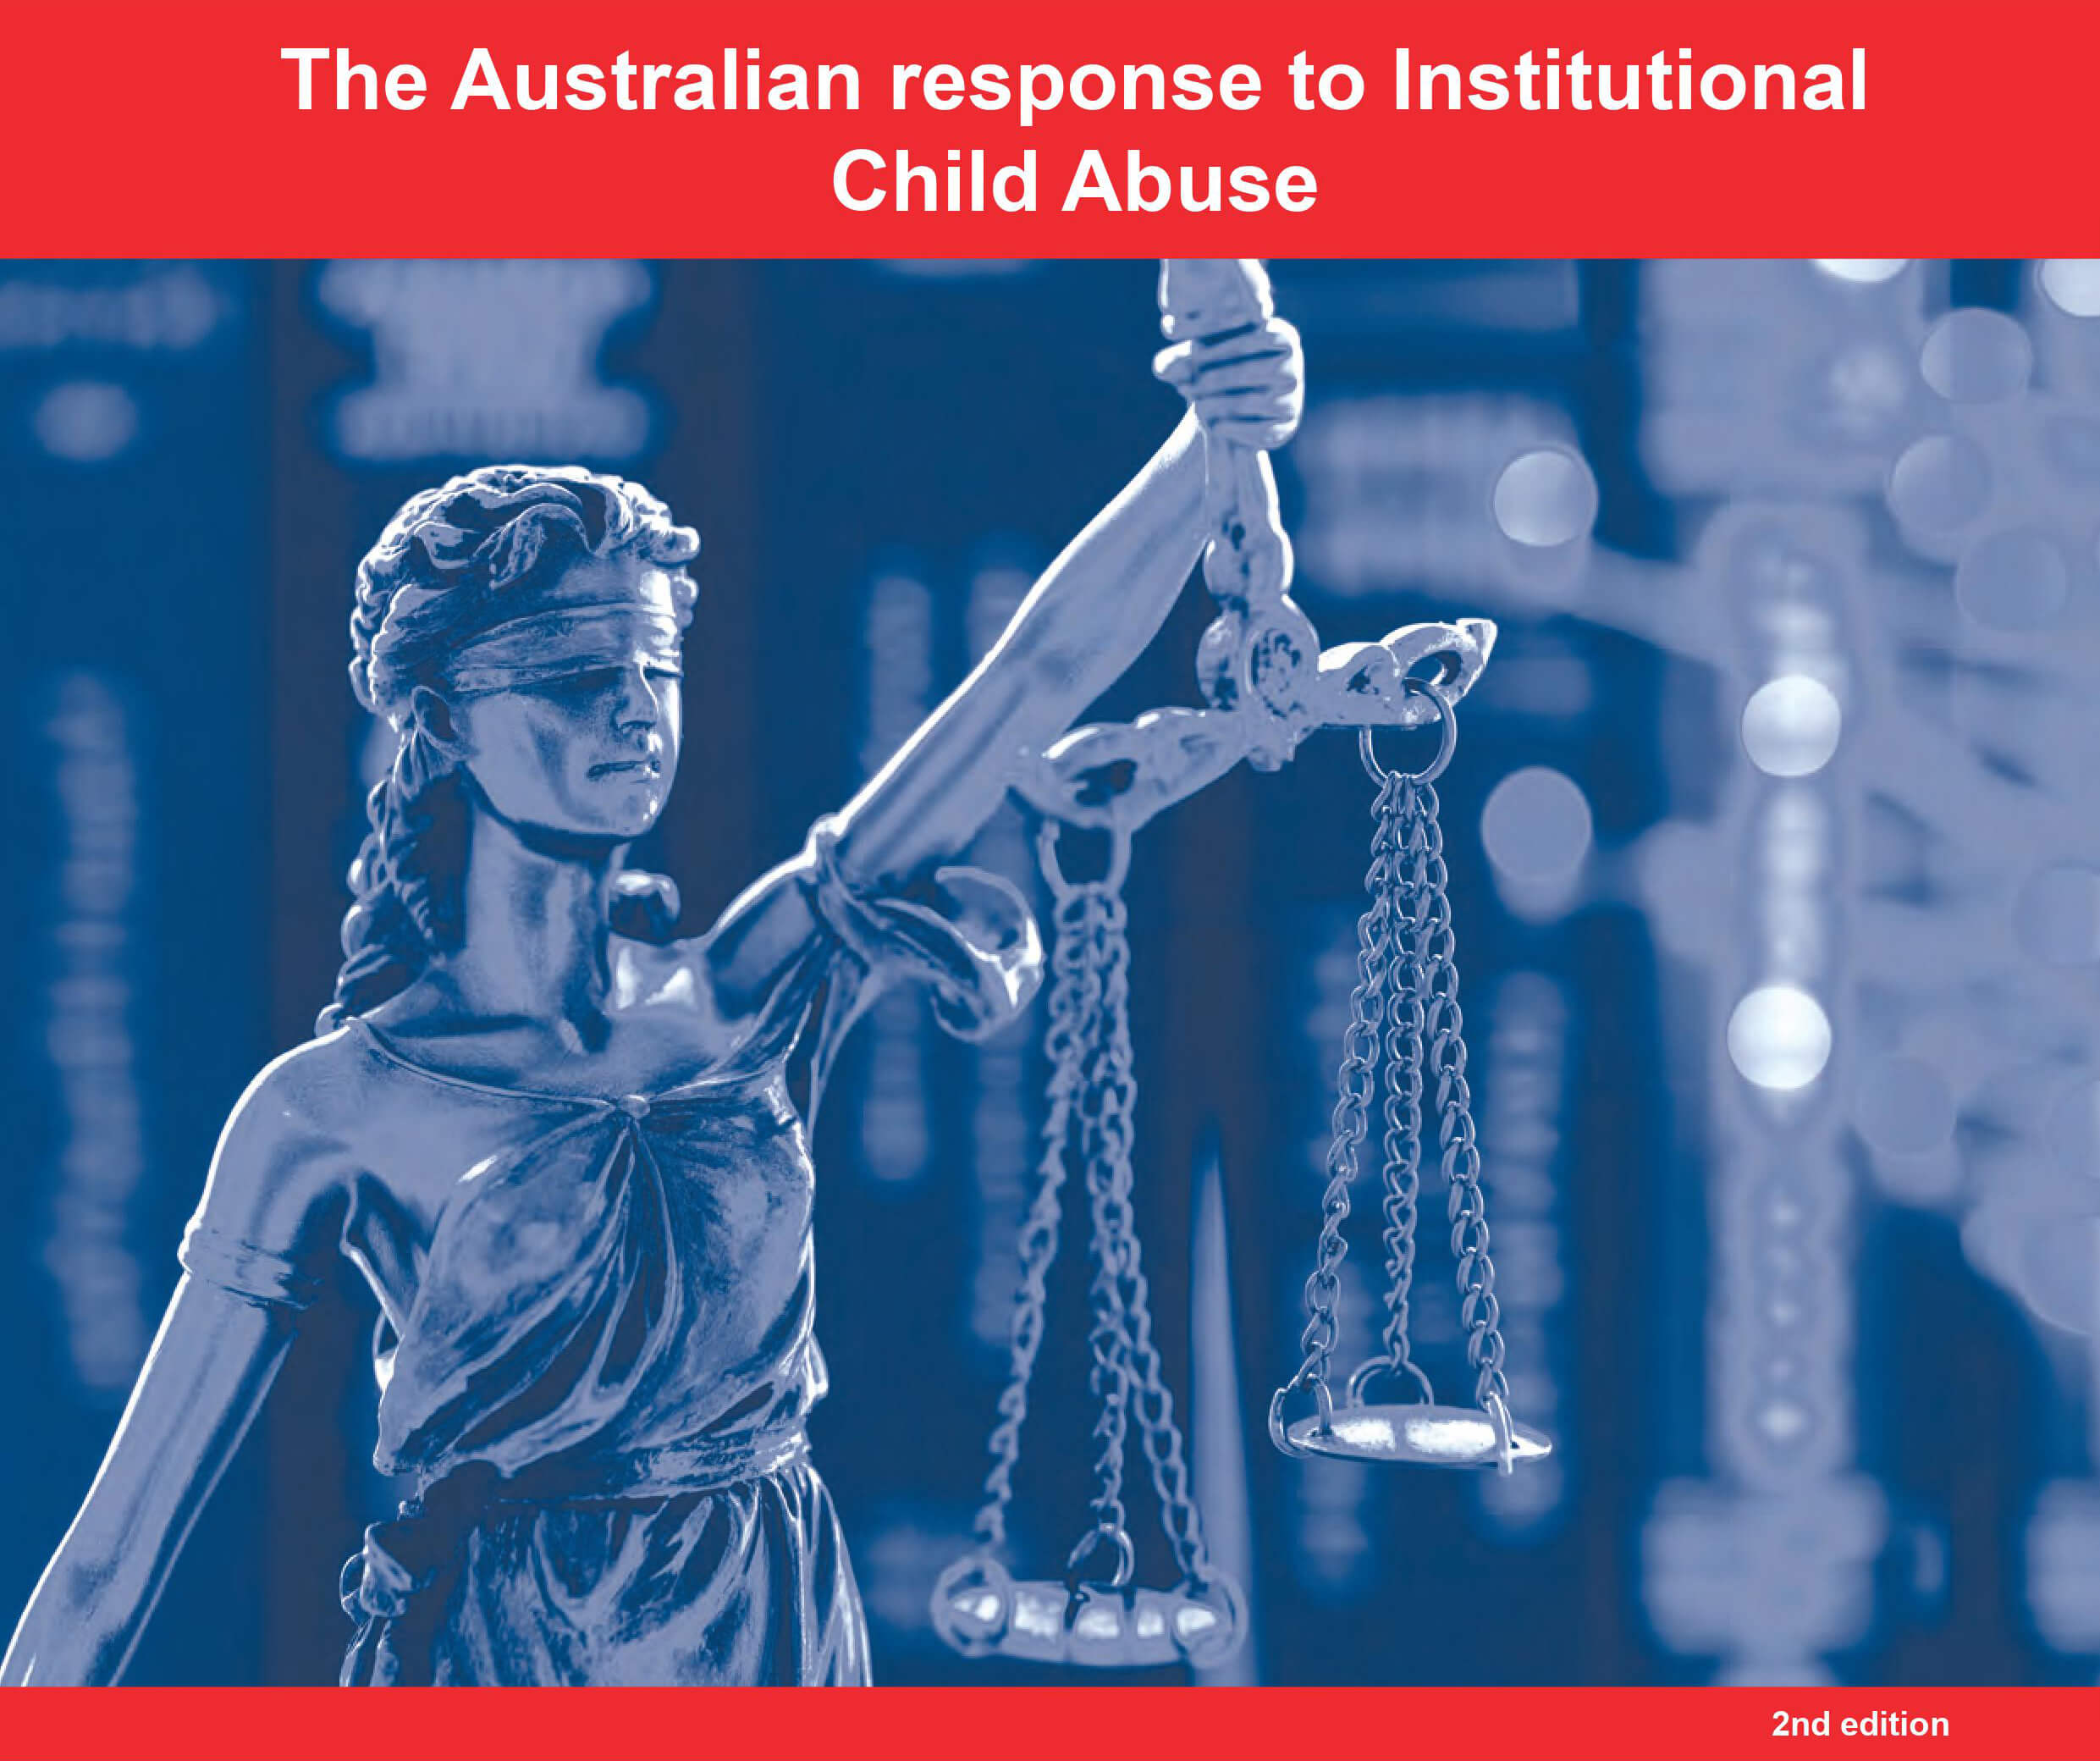 The Australian response to Institutional Child Abuse (2nd edition)